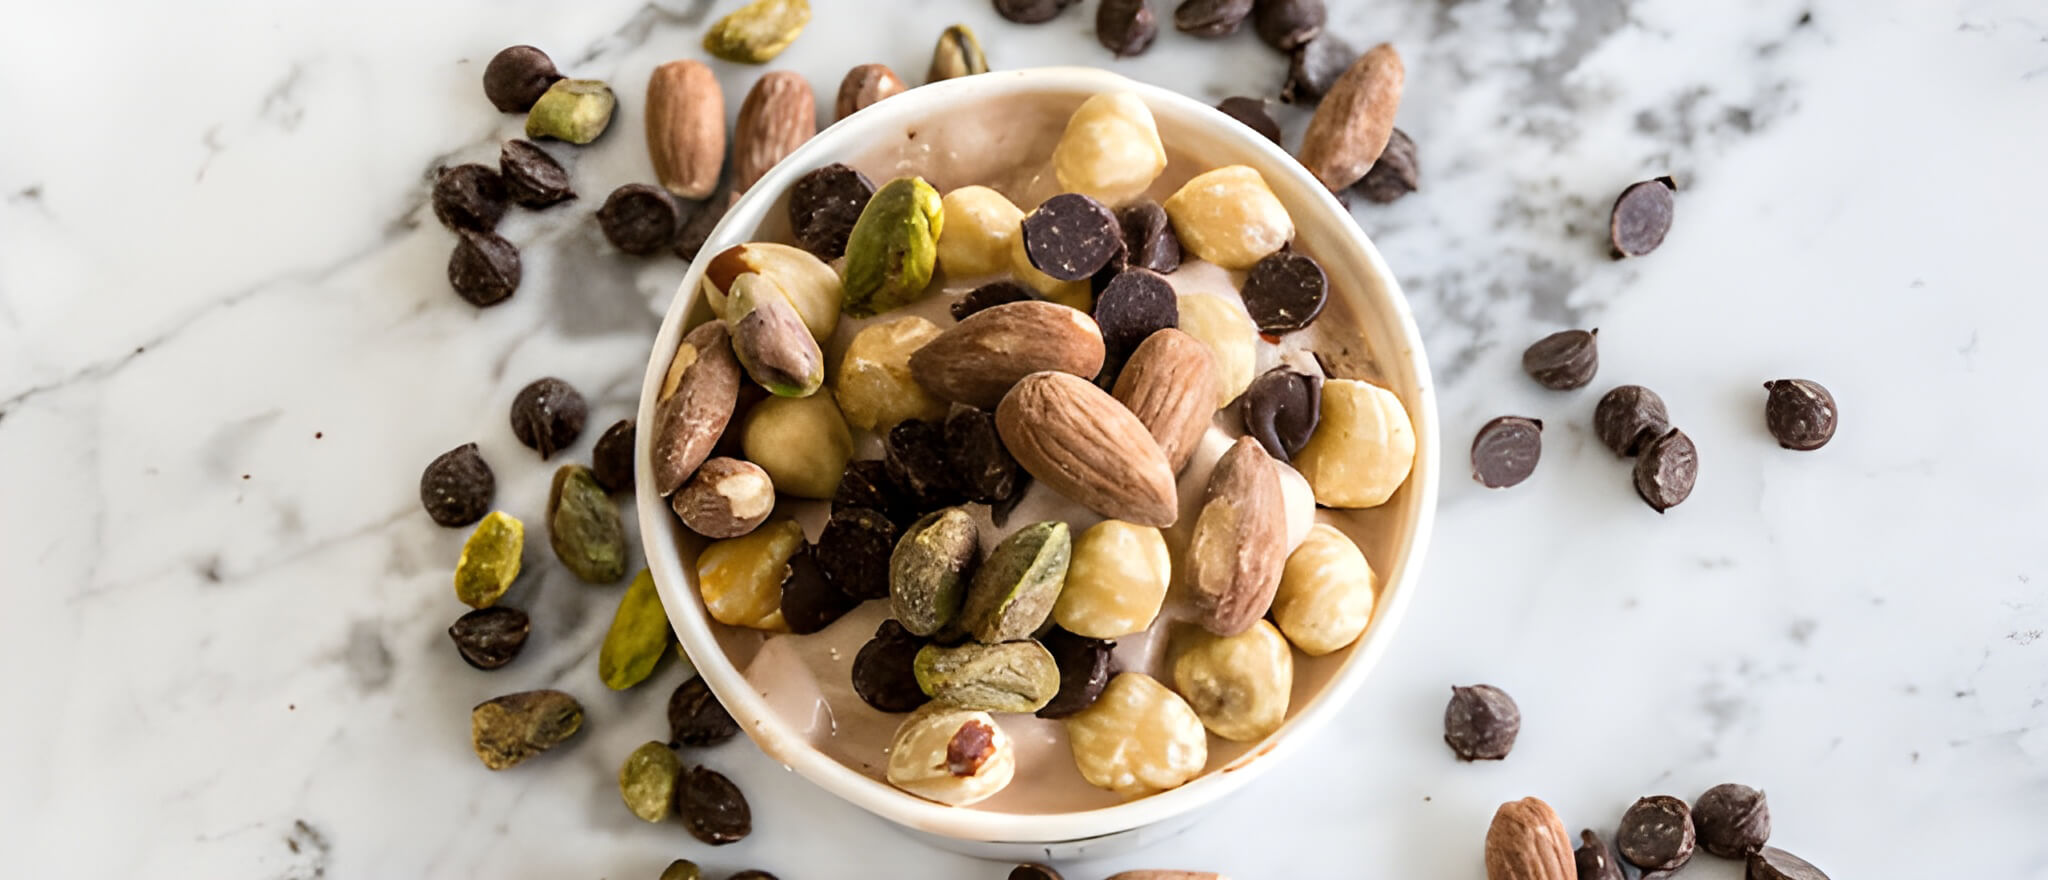 Nuts and Seeds boost Immune System